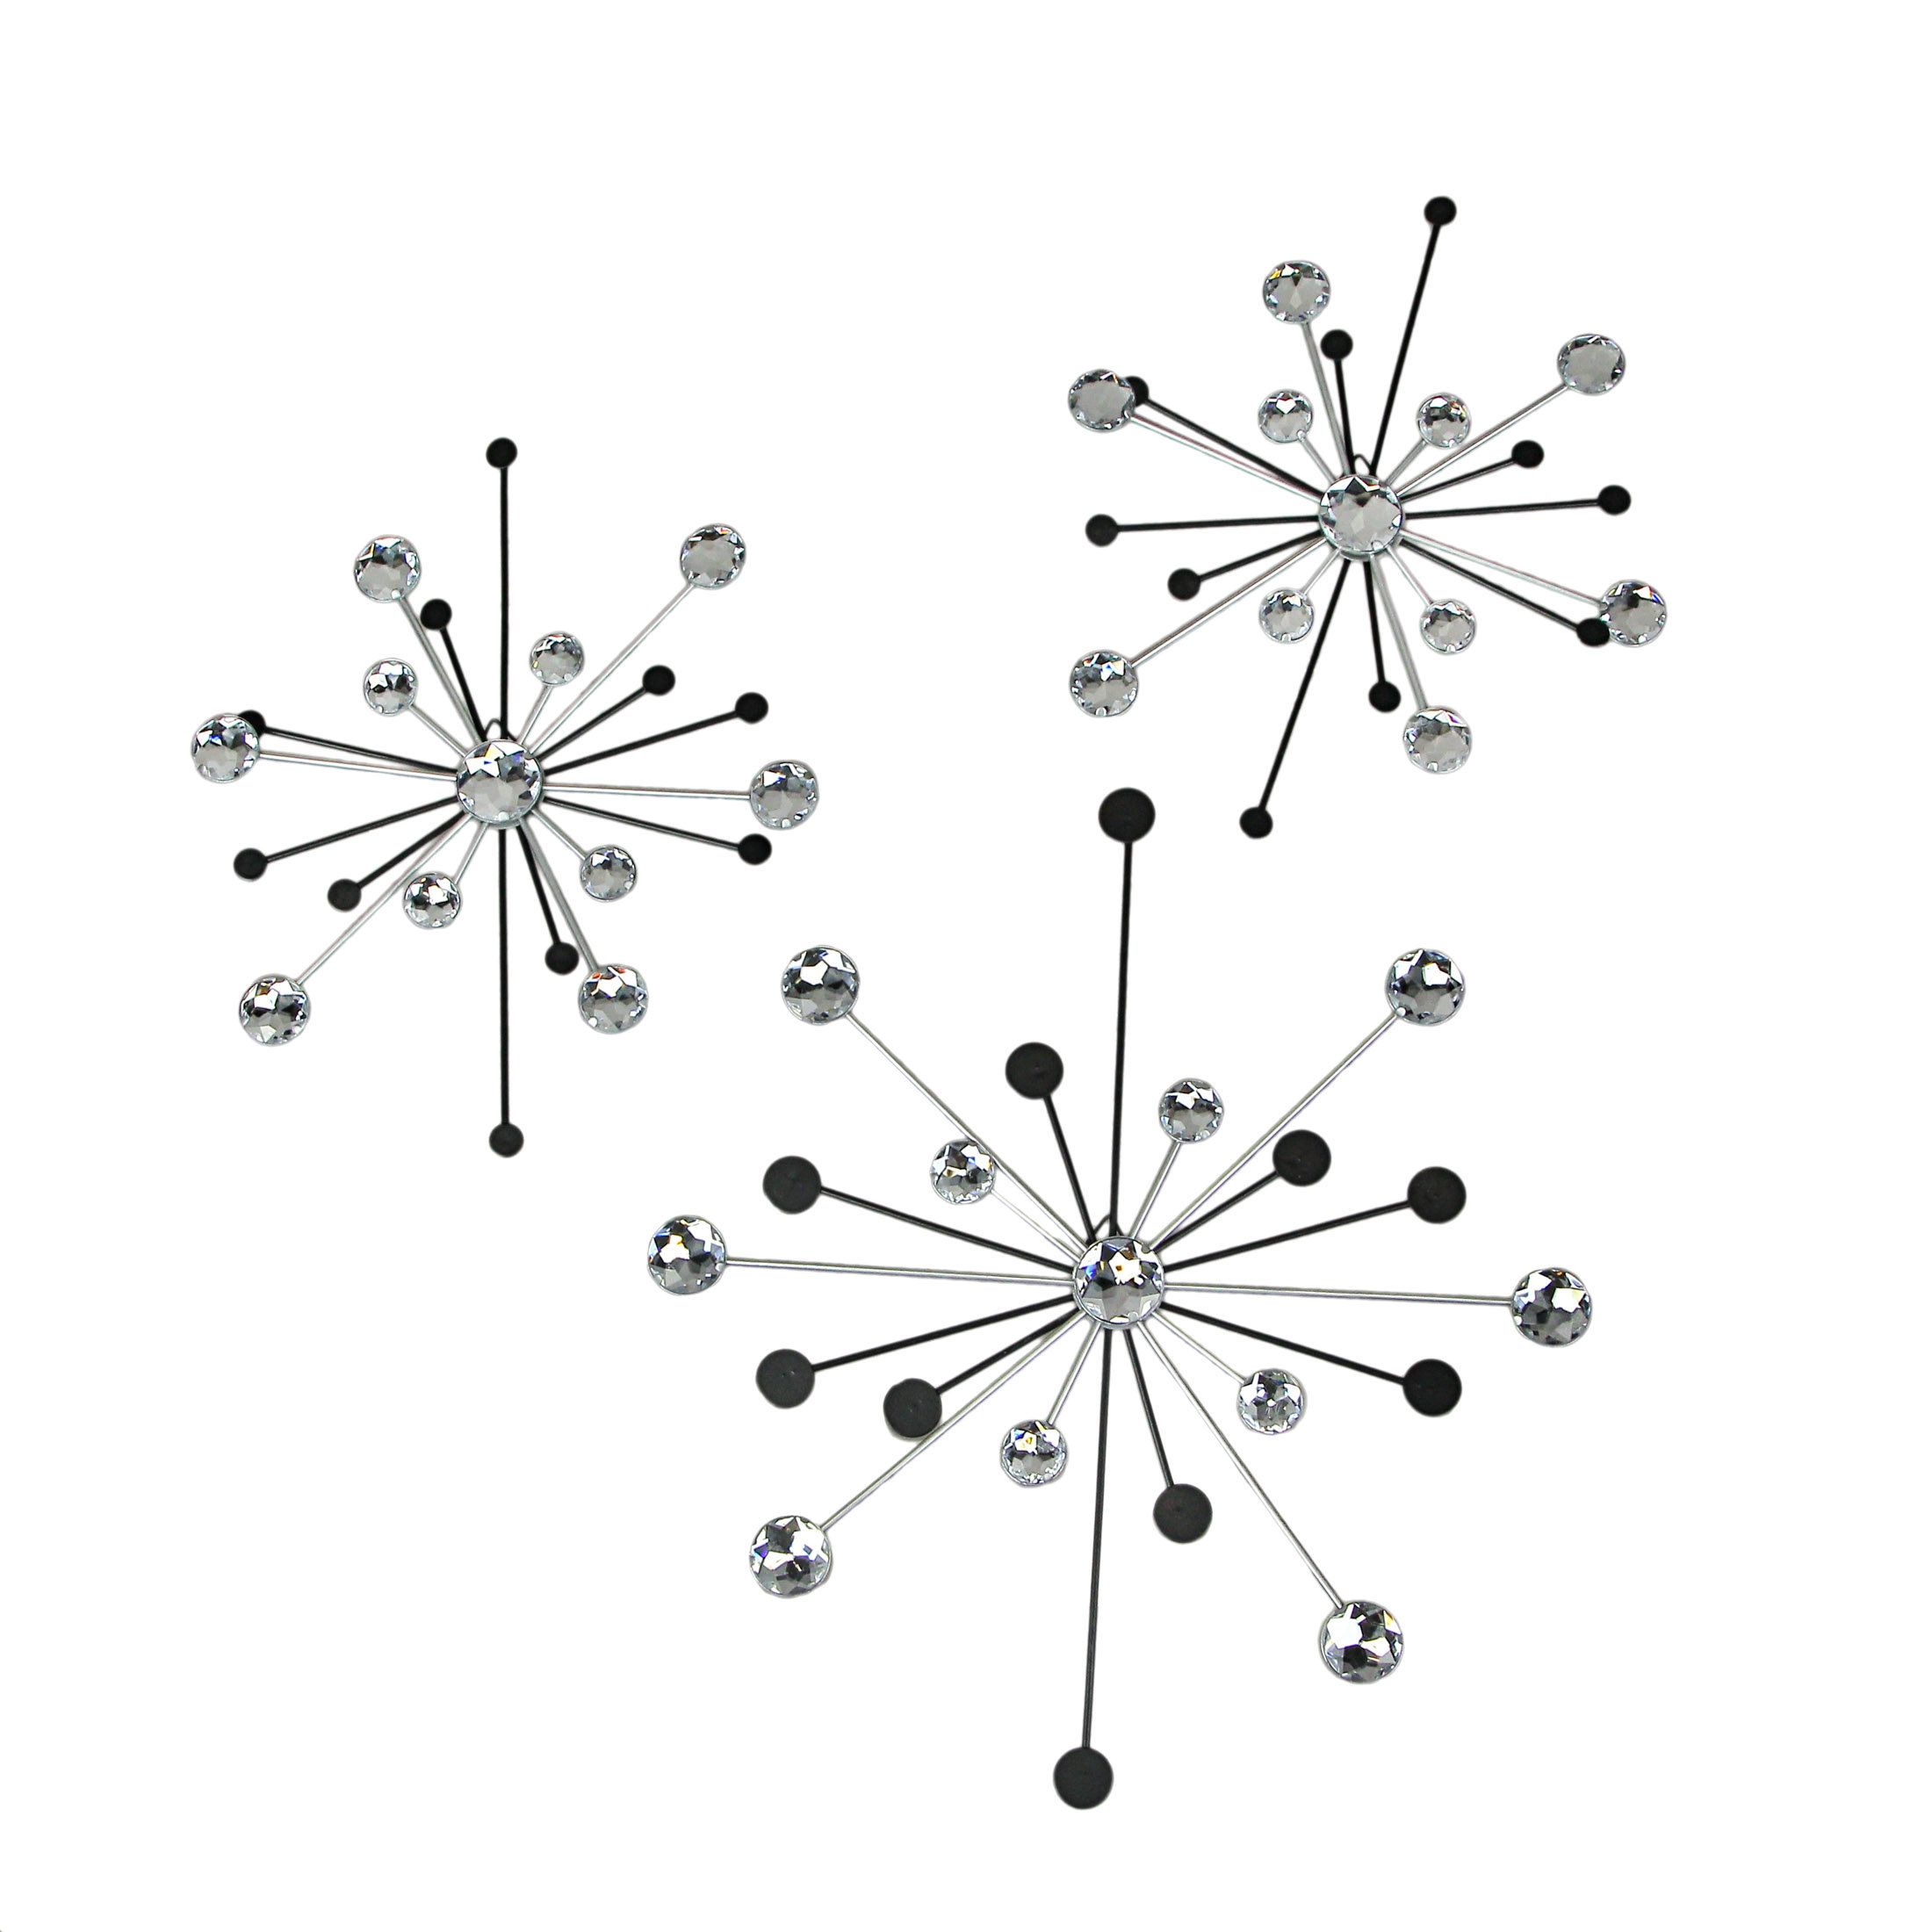 Everly Quinn 3 Piece Jeweled Atomic Starburst Wall Décor Set | Wayfair With Regard To Starburst Jeweled Hanging Wall Art (View 2 of 15)